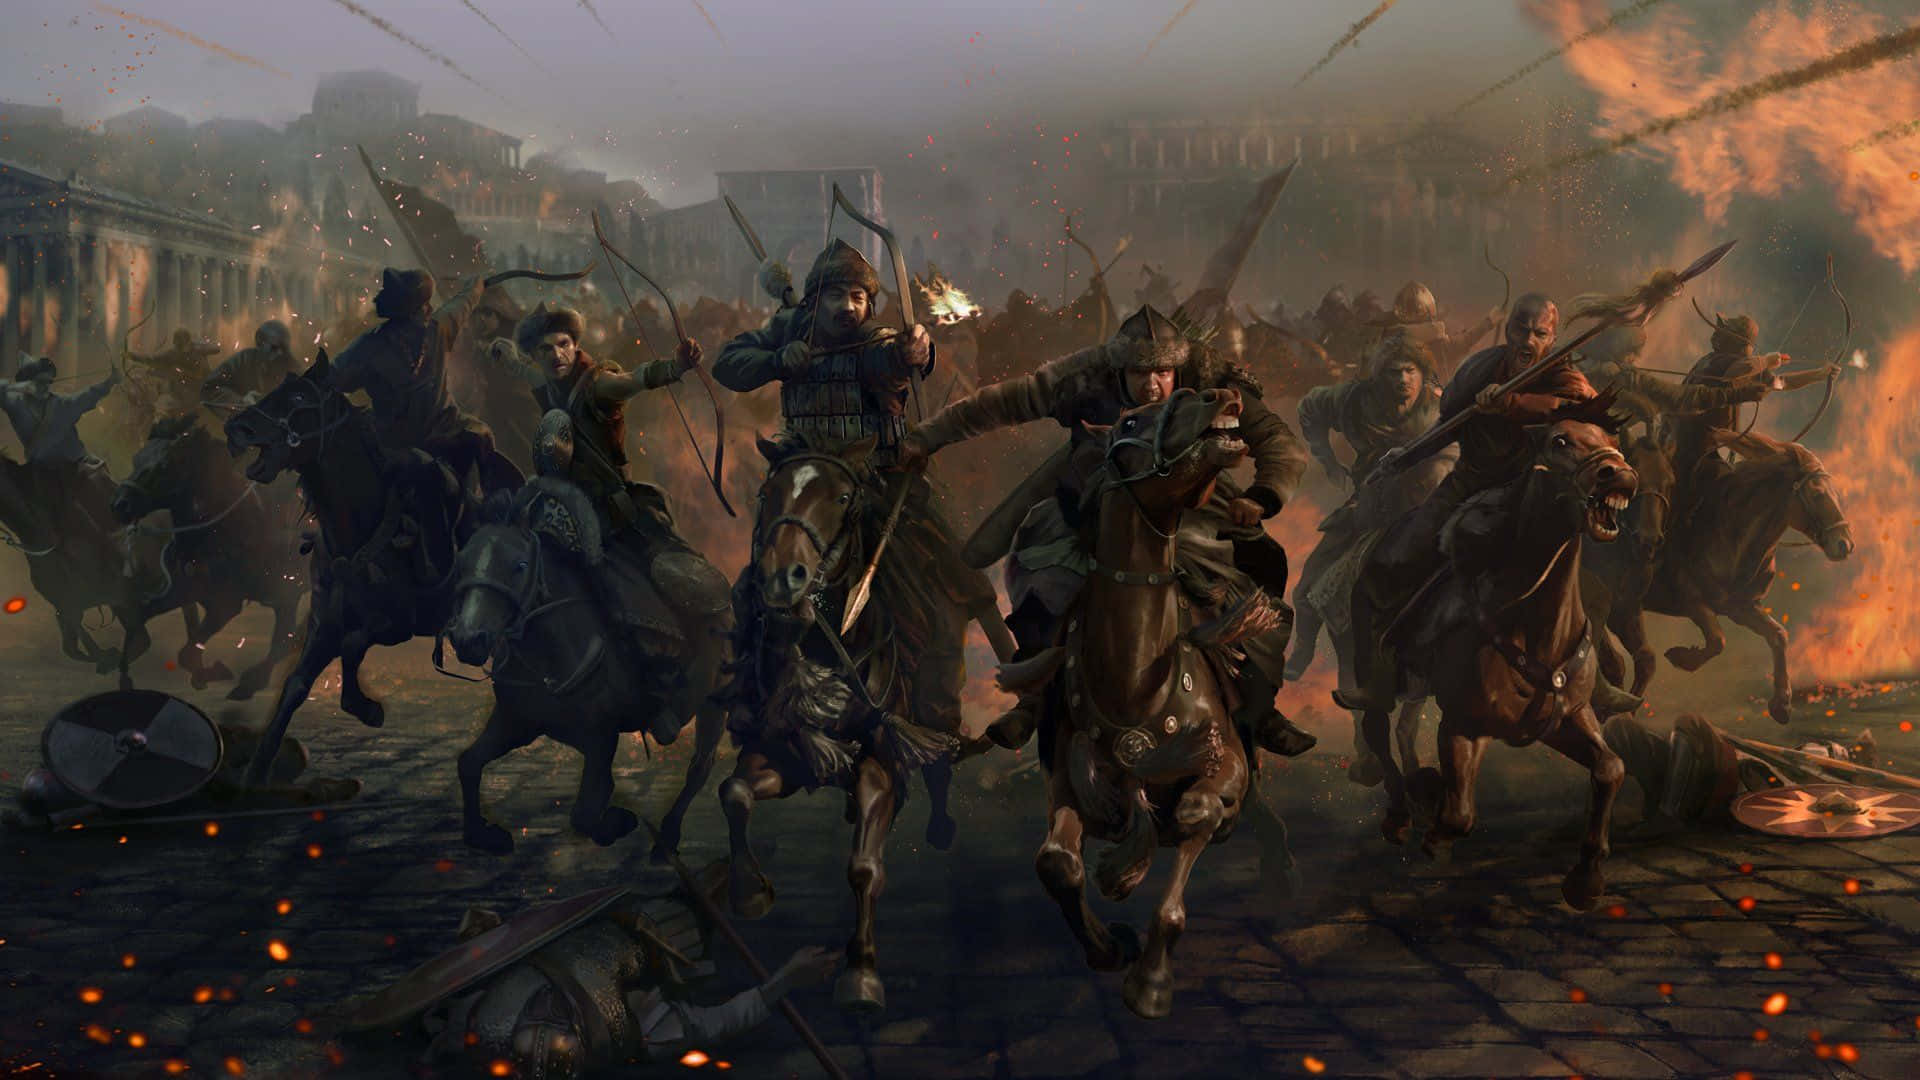 A Group Of Men On Horses In A City Background